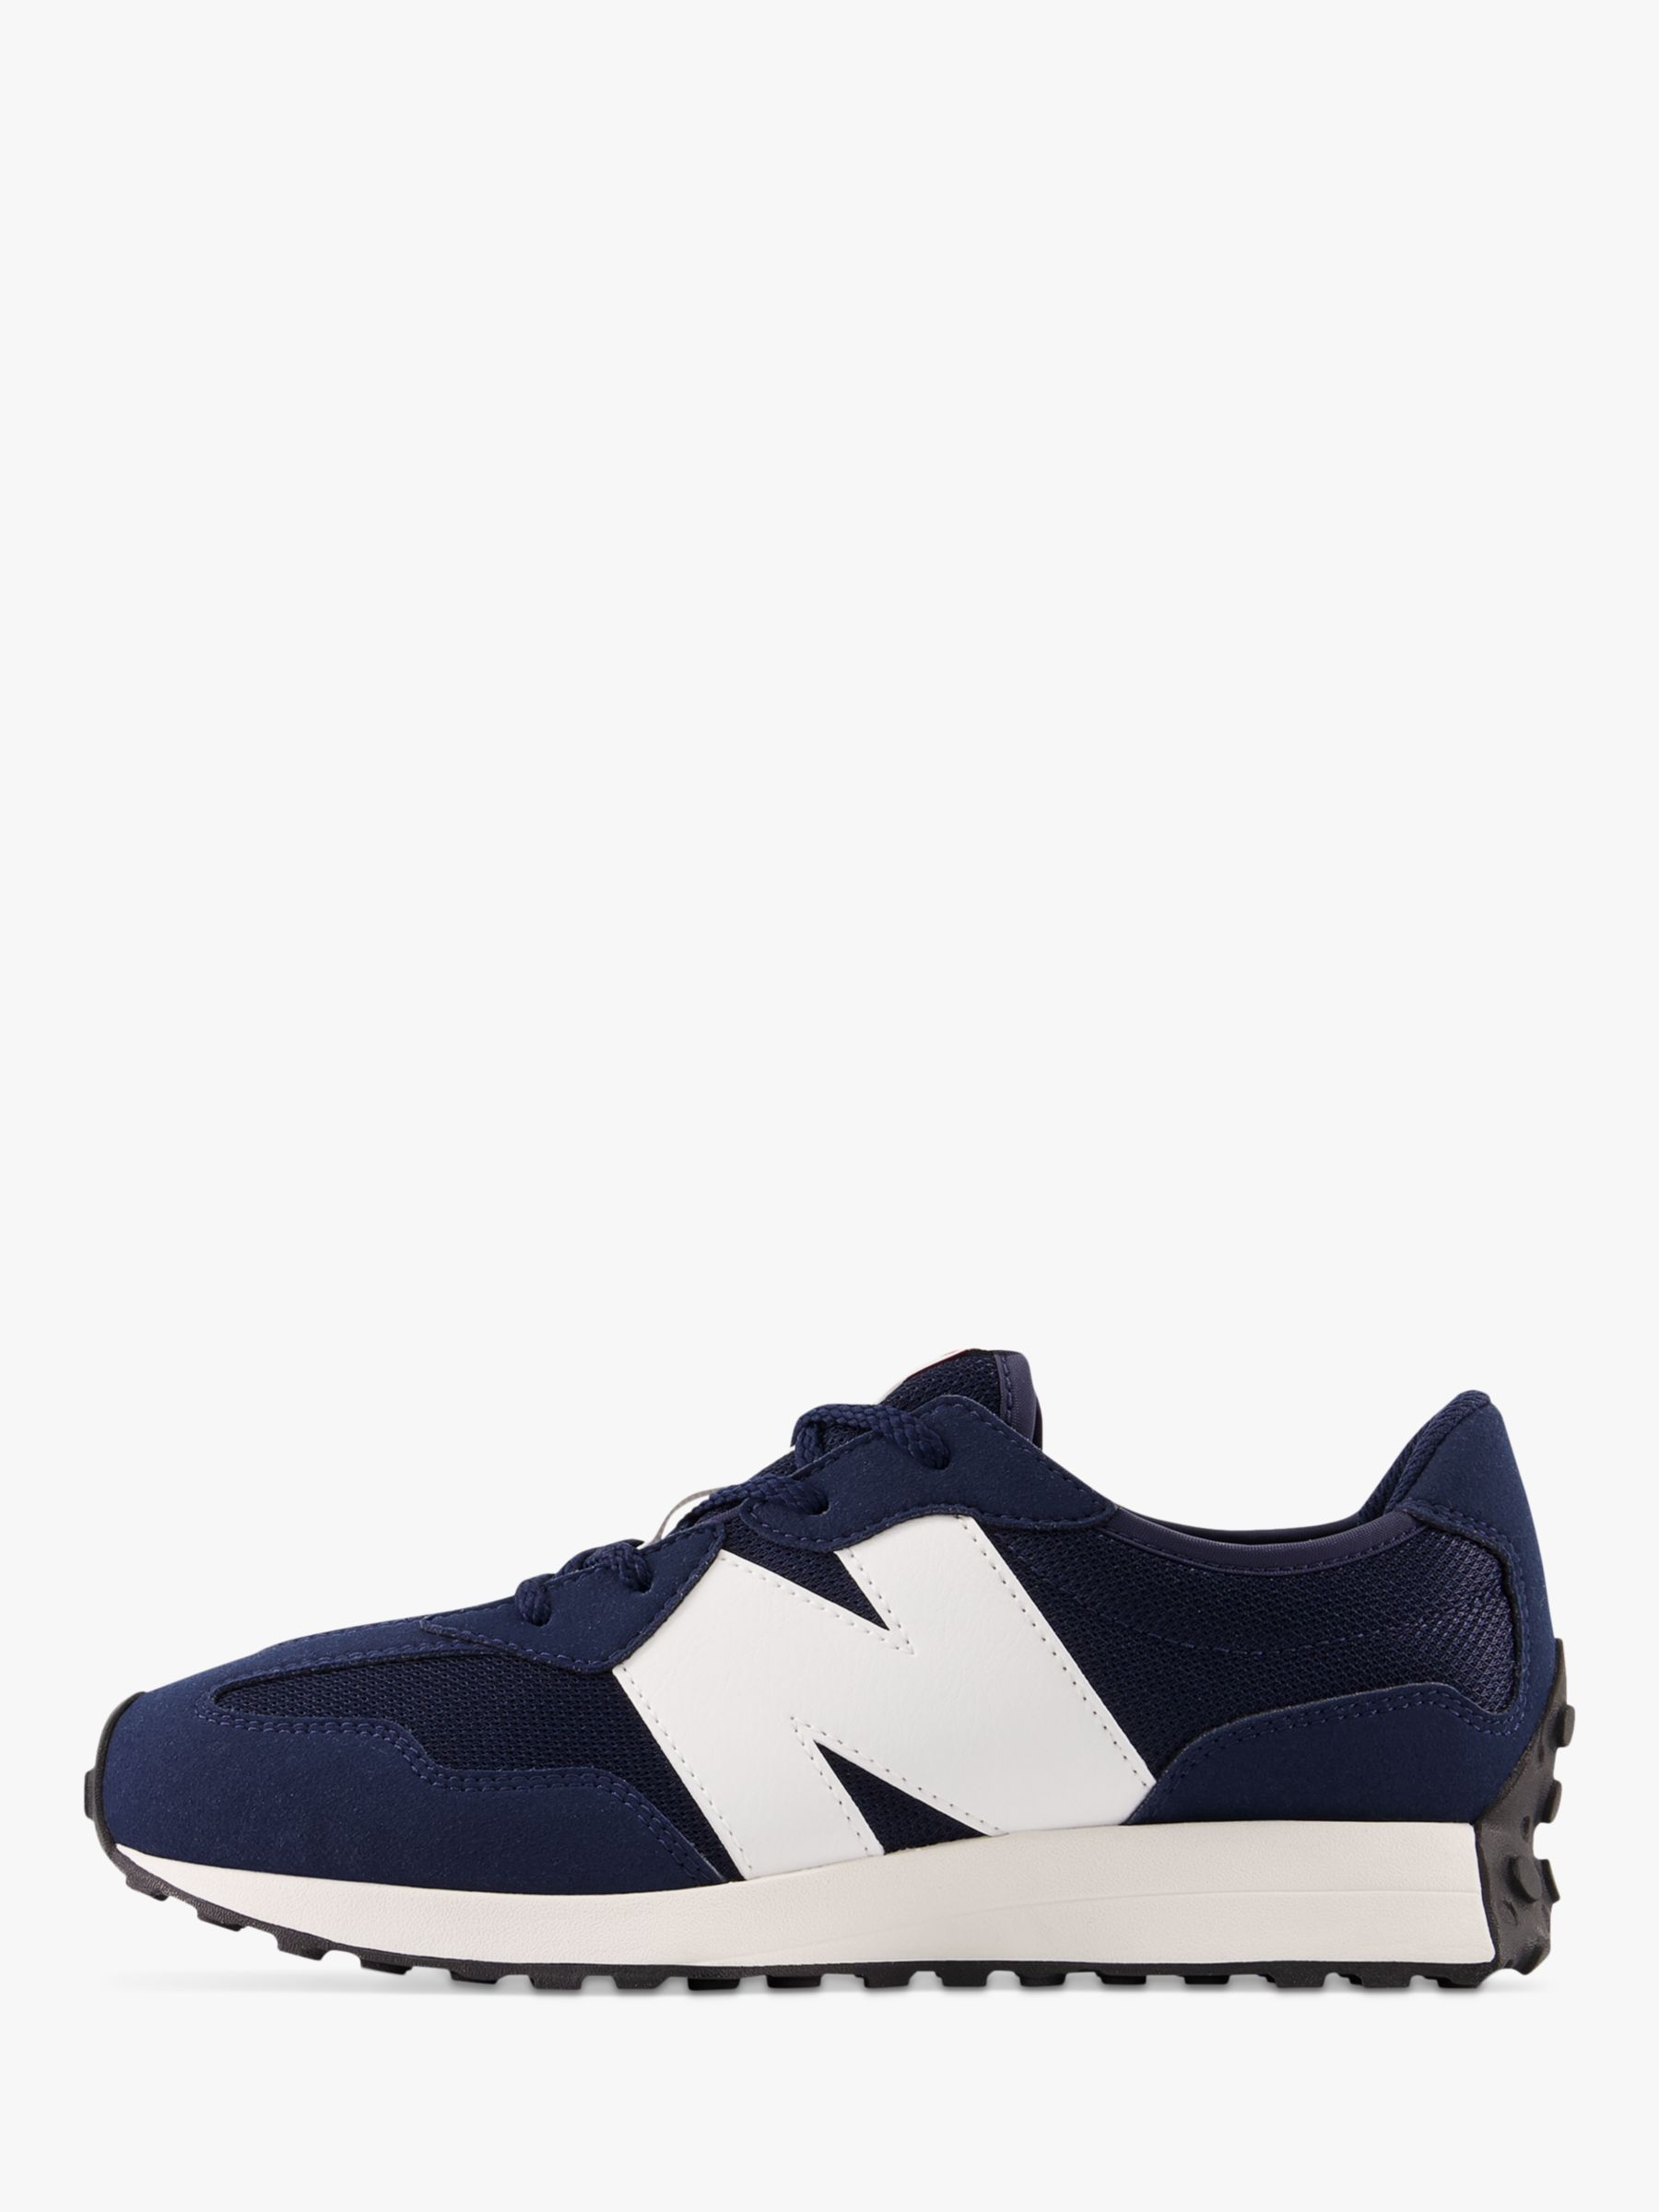 Buy New Balance Kids' 327 Lace Up Trainers Online at johnlewis.com